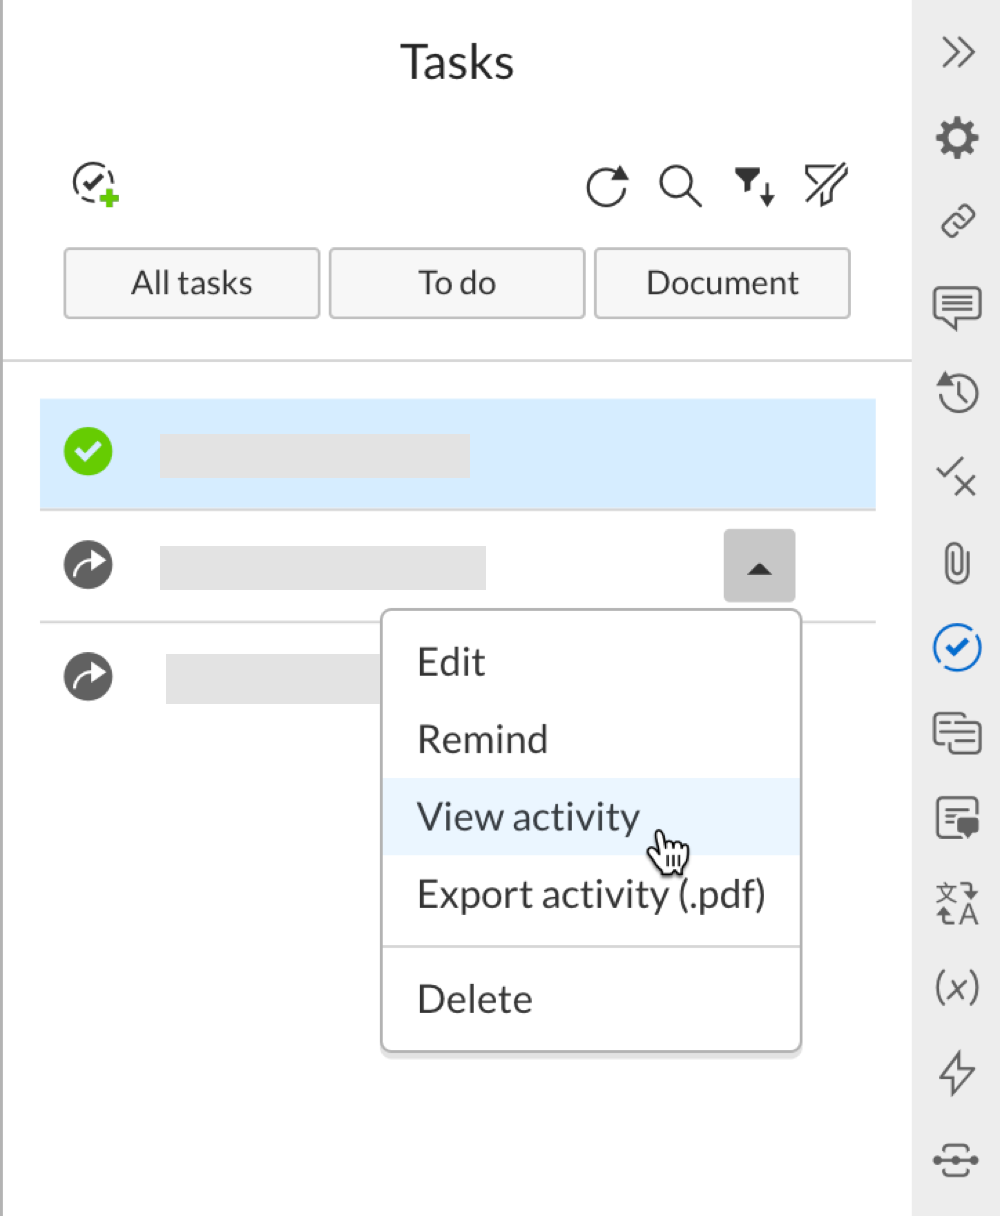 Select View activity from the drop-down options